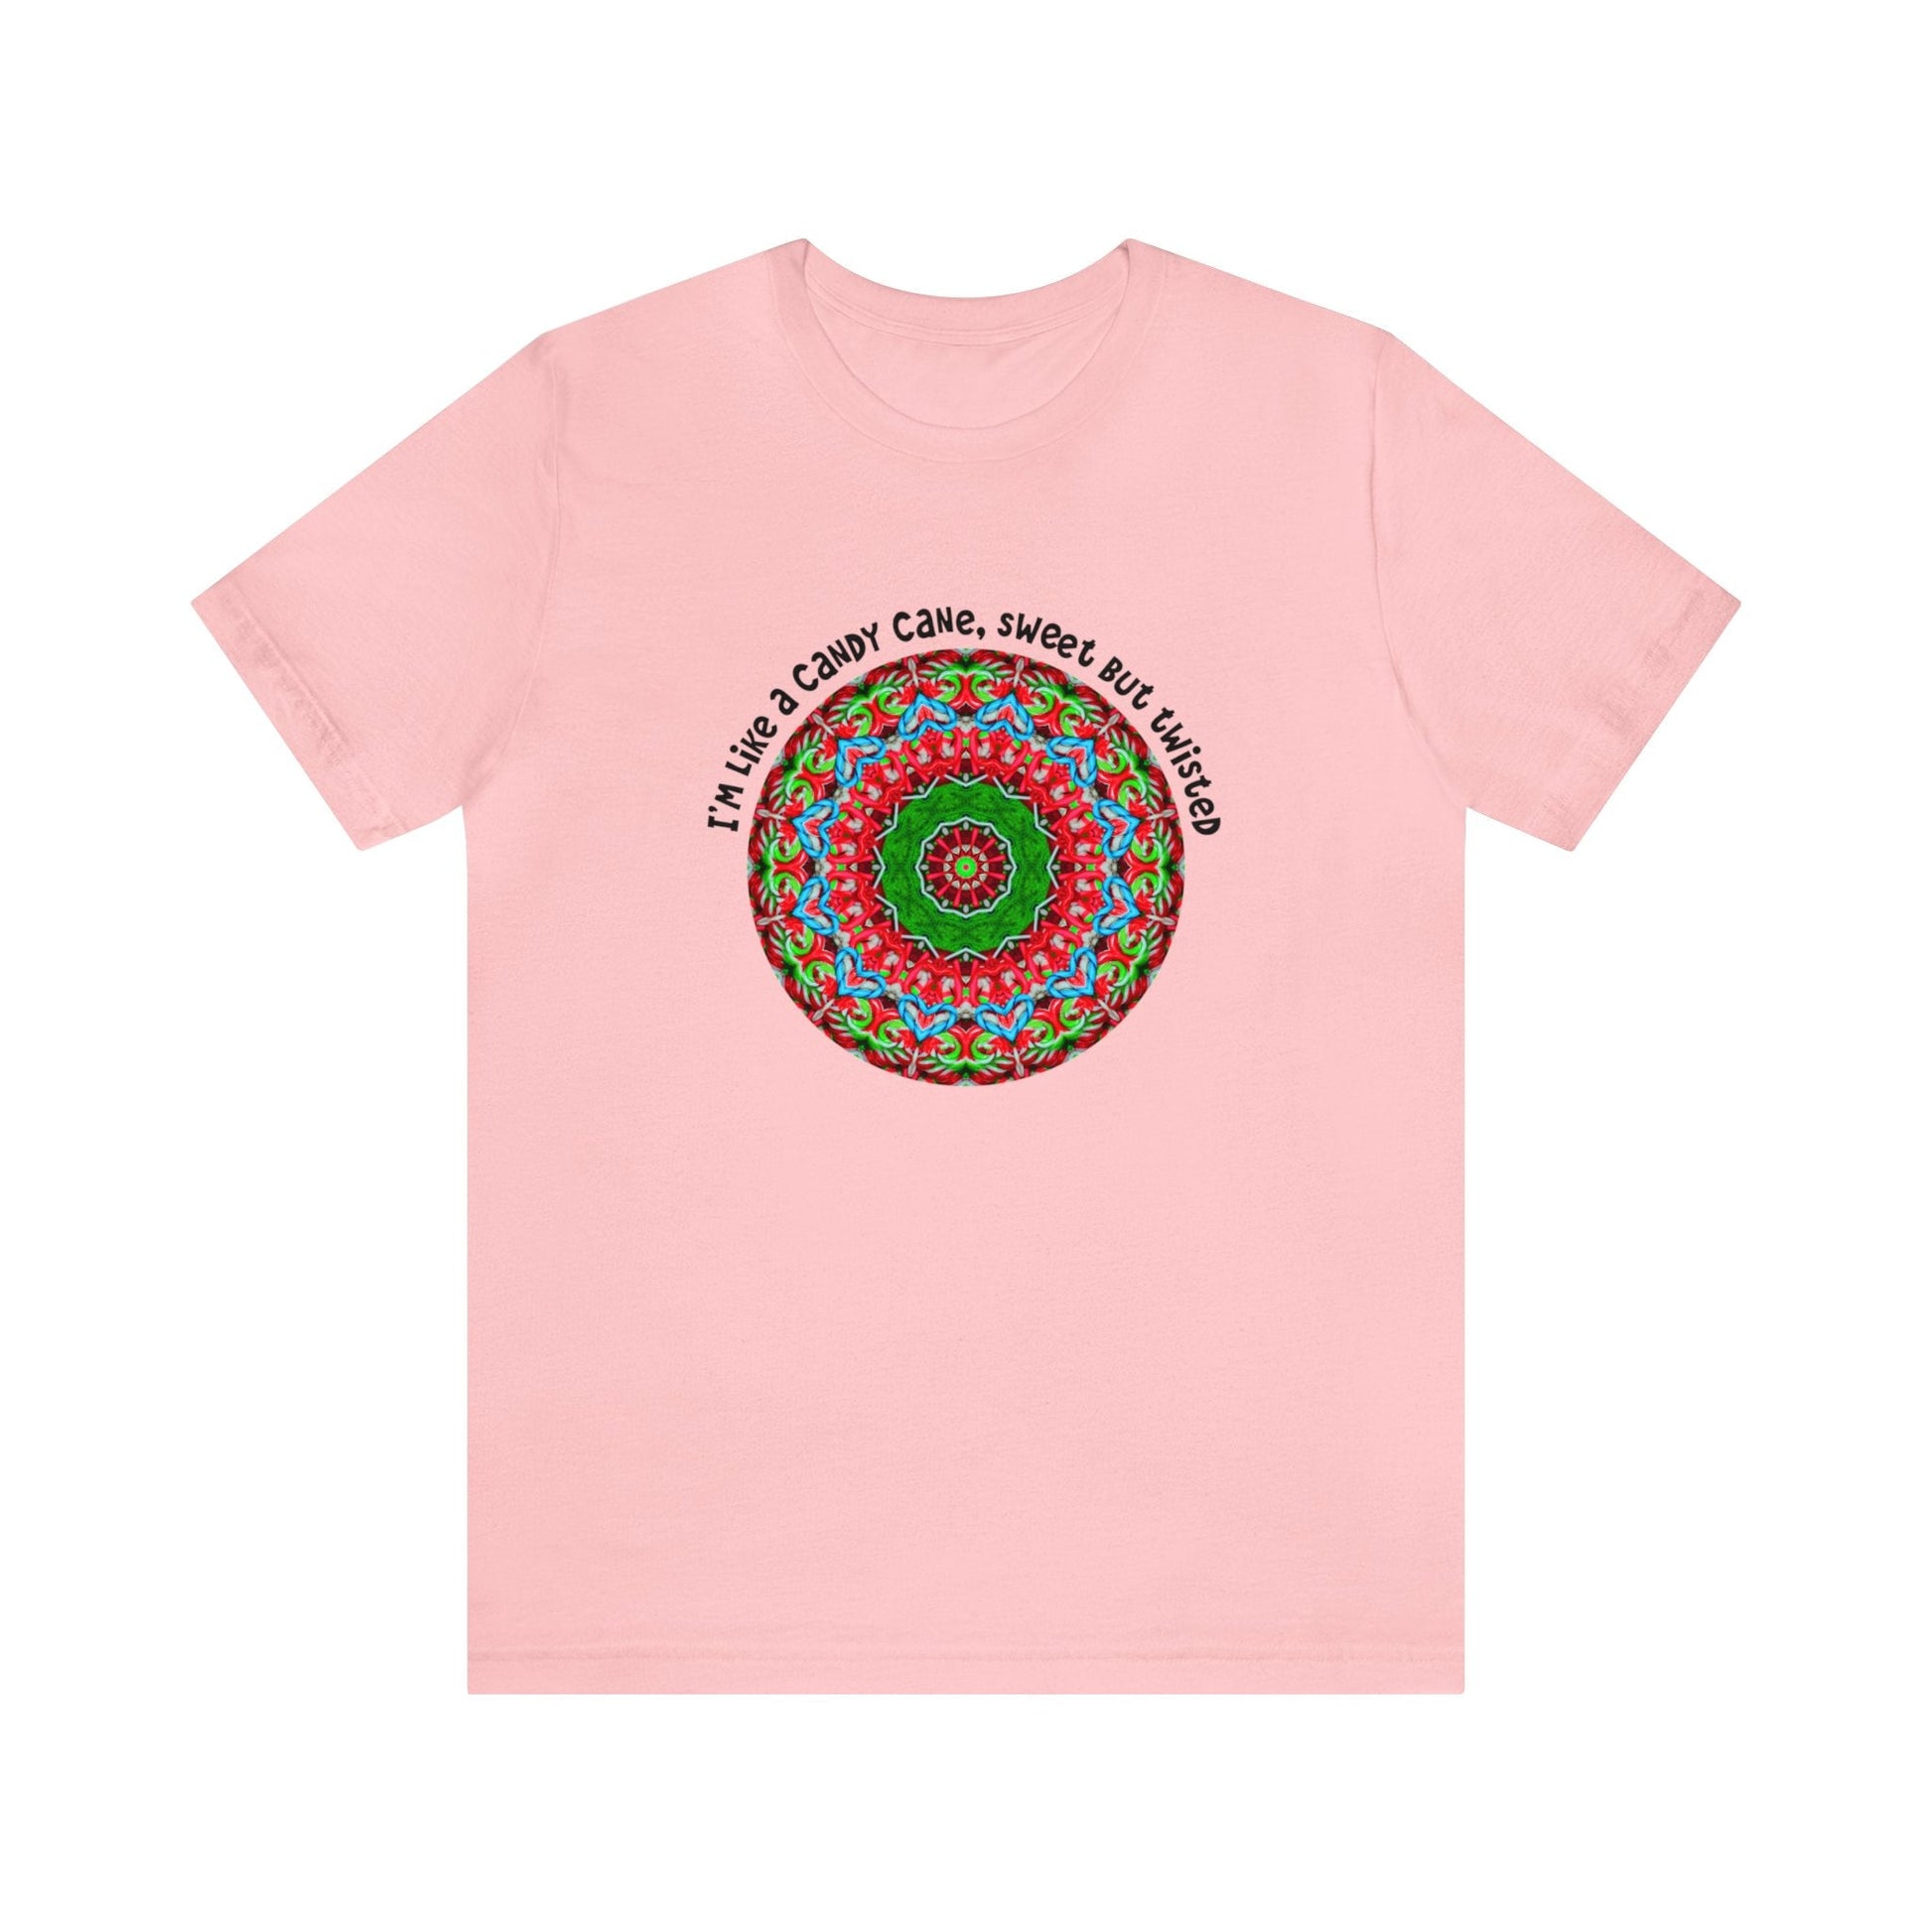 Sarcastic Funny Christmas Shirt - All Day Graphic TShirts, Im like a candy cane cute but twisted Candy Cane Mandala Pink